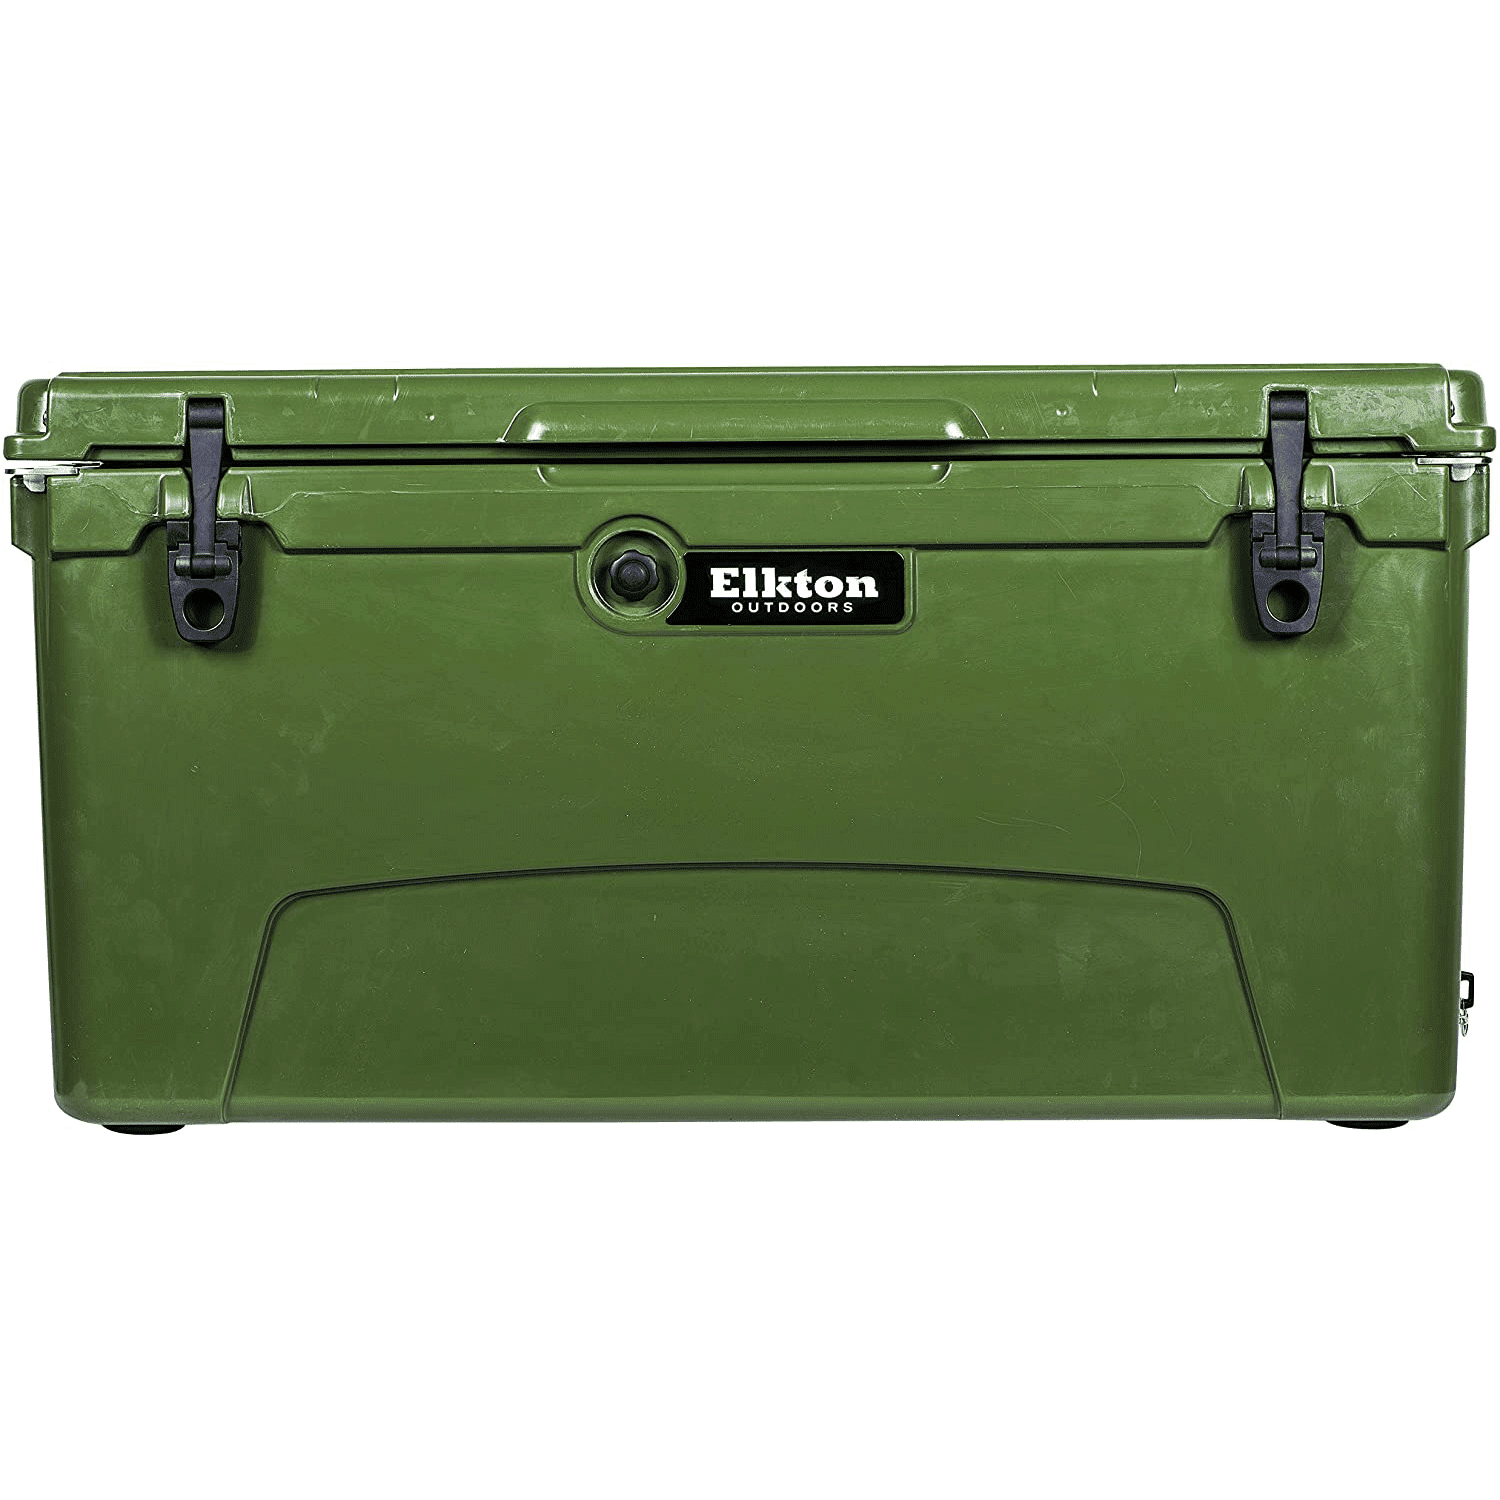 Elkton Outdoors ELK-FCB-60 60-Inch Insulated Large Portable Fish Cooler  Kill Bag